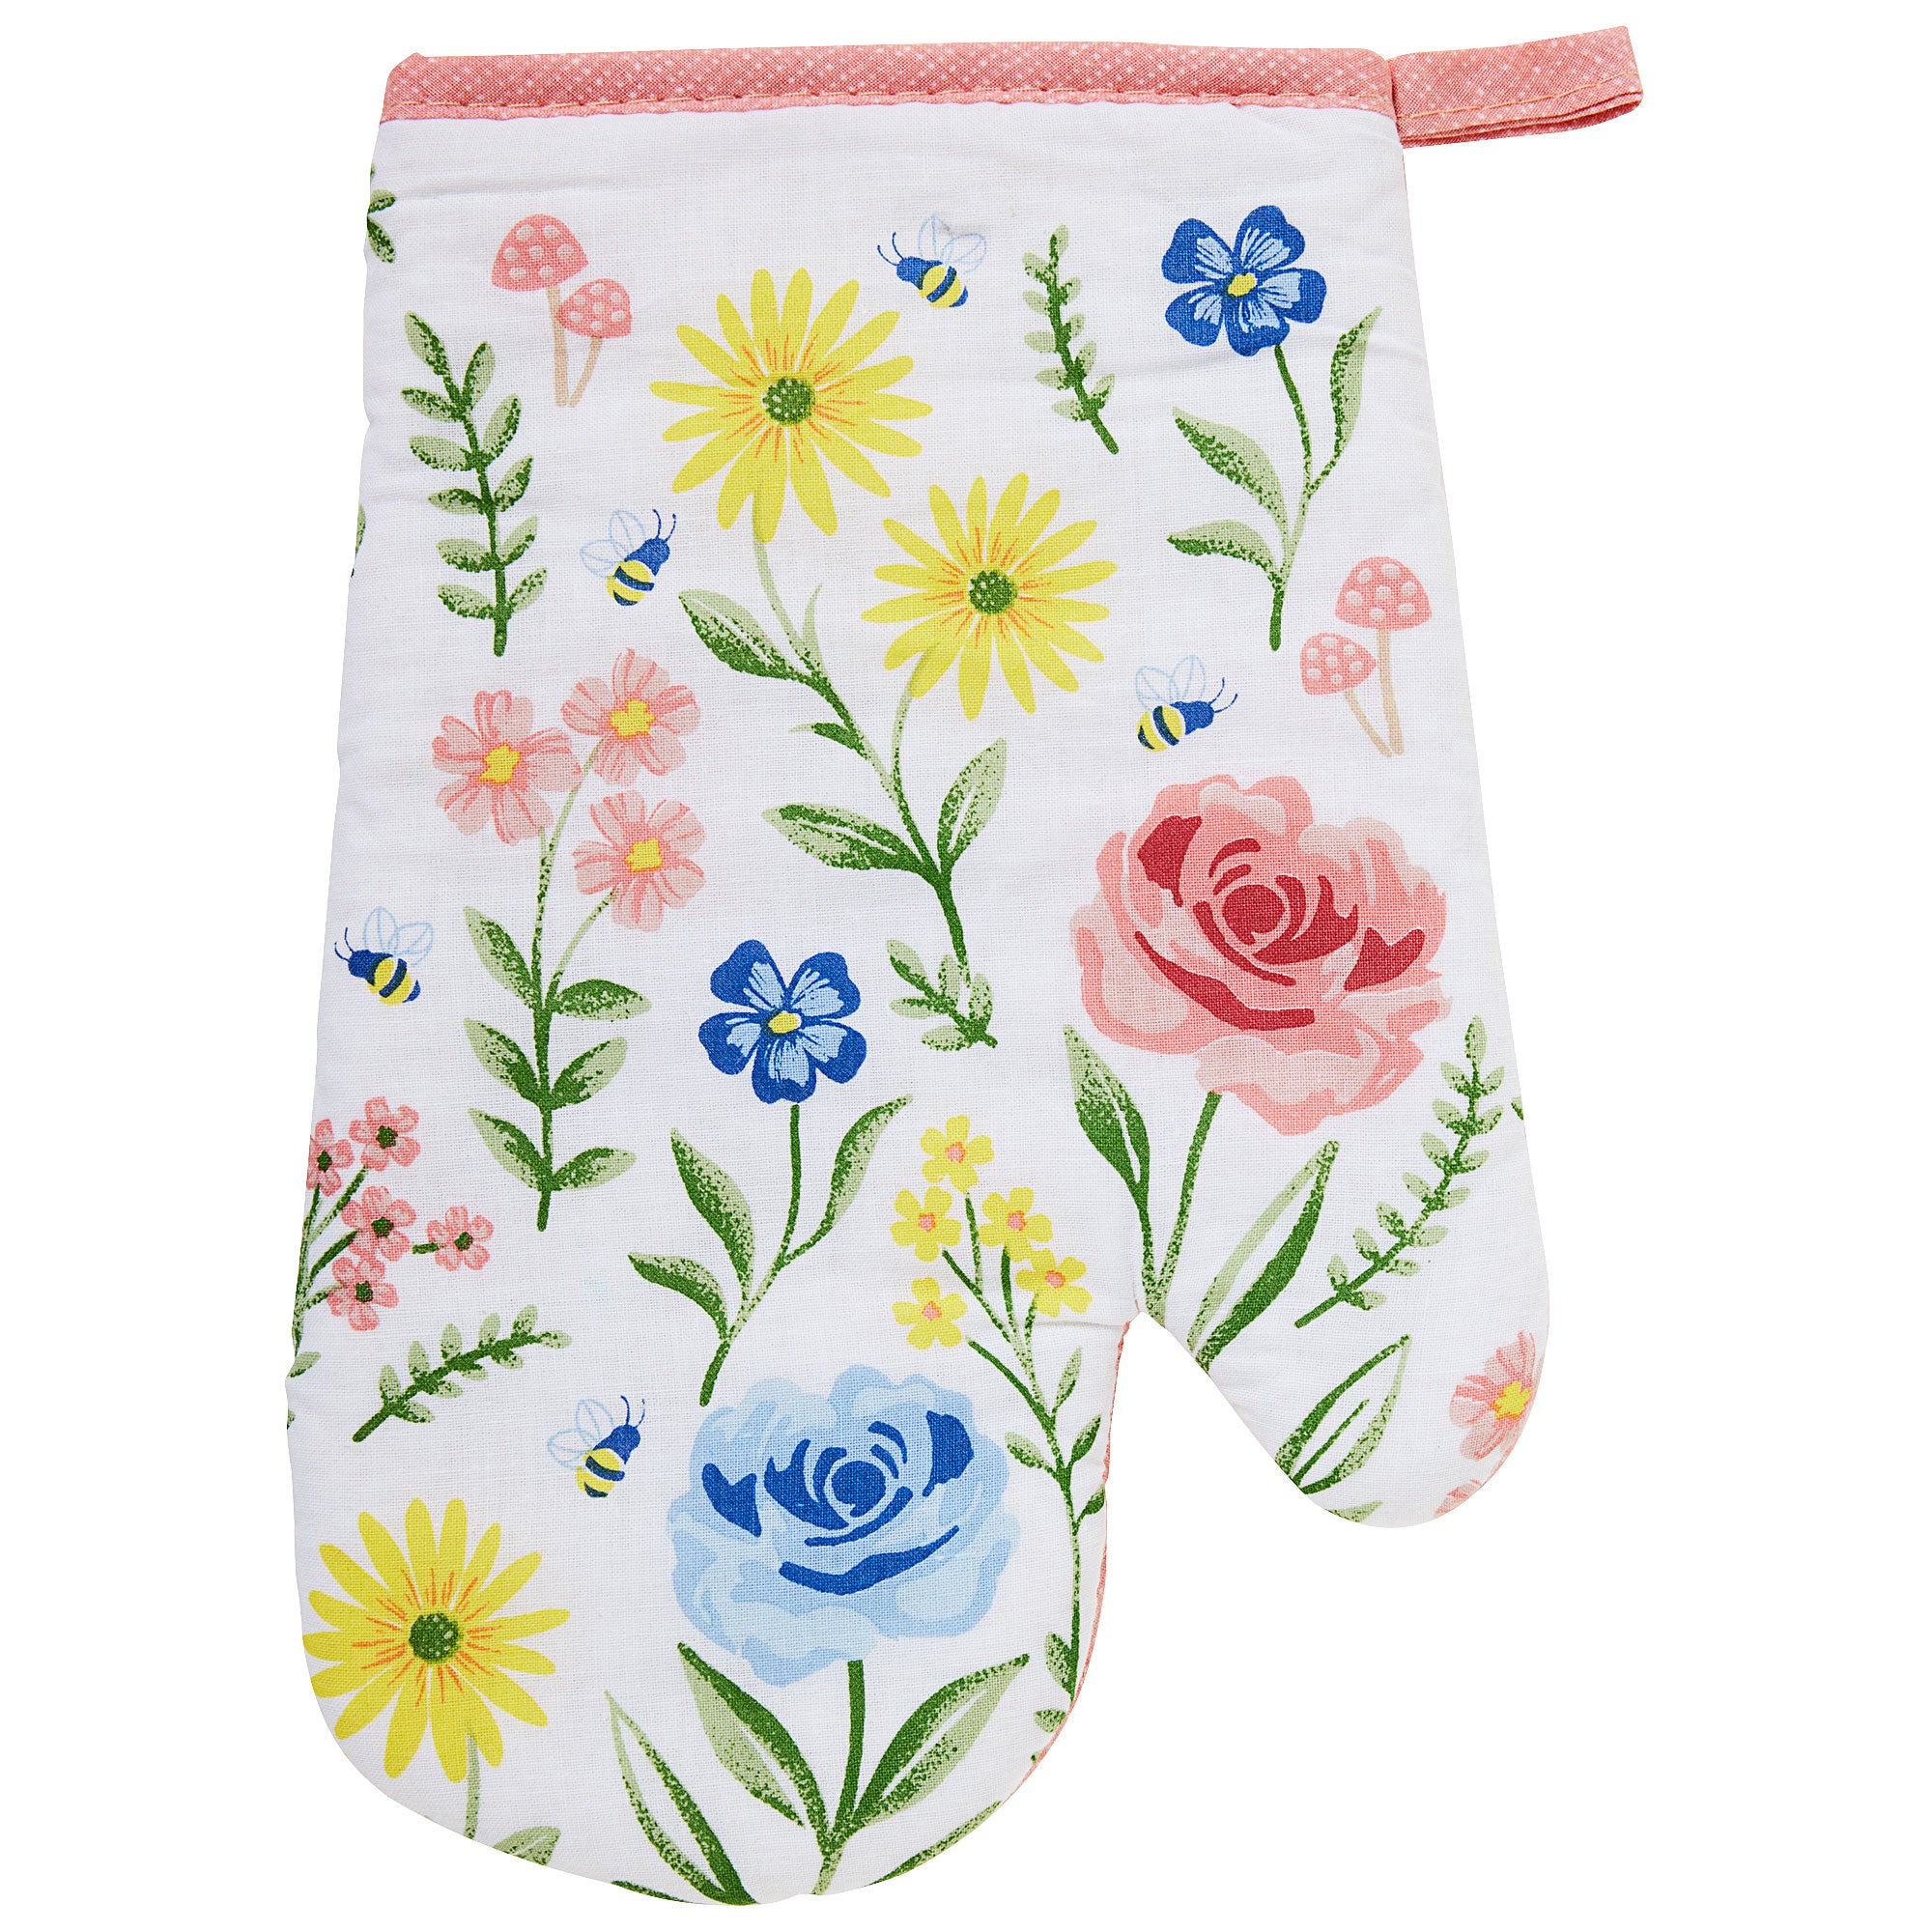 Oven Mitt Spring Inspired Designs Assorted | The Reject Shop